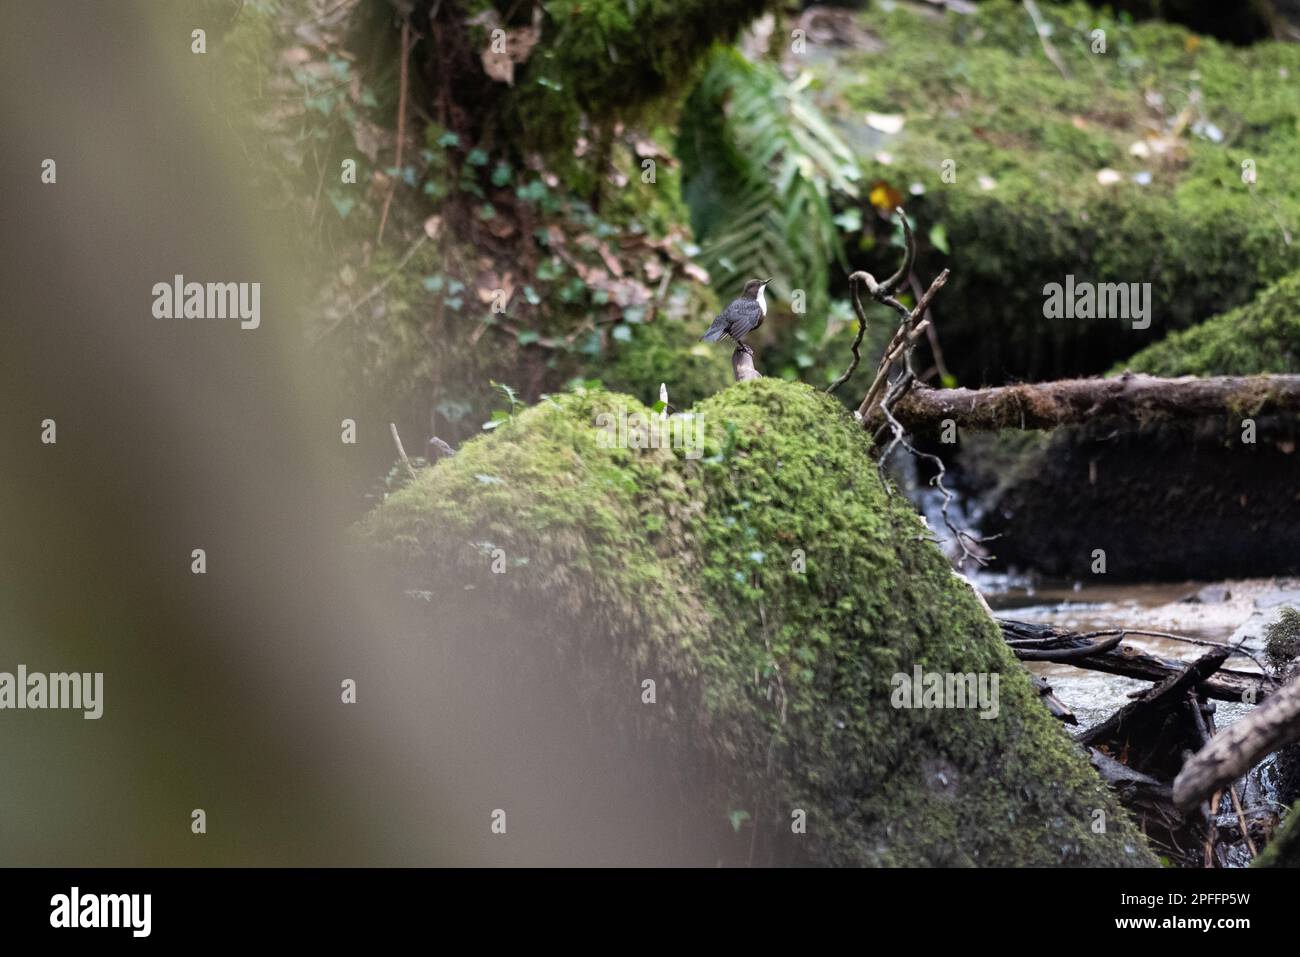 Kennal Vale, Cornwall, 11th February, 2023, A white-throated dipper/Cinclus by a stream at Kennal Vale, Credit: Luke Williams/Alamy stock Images. Stock Photo